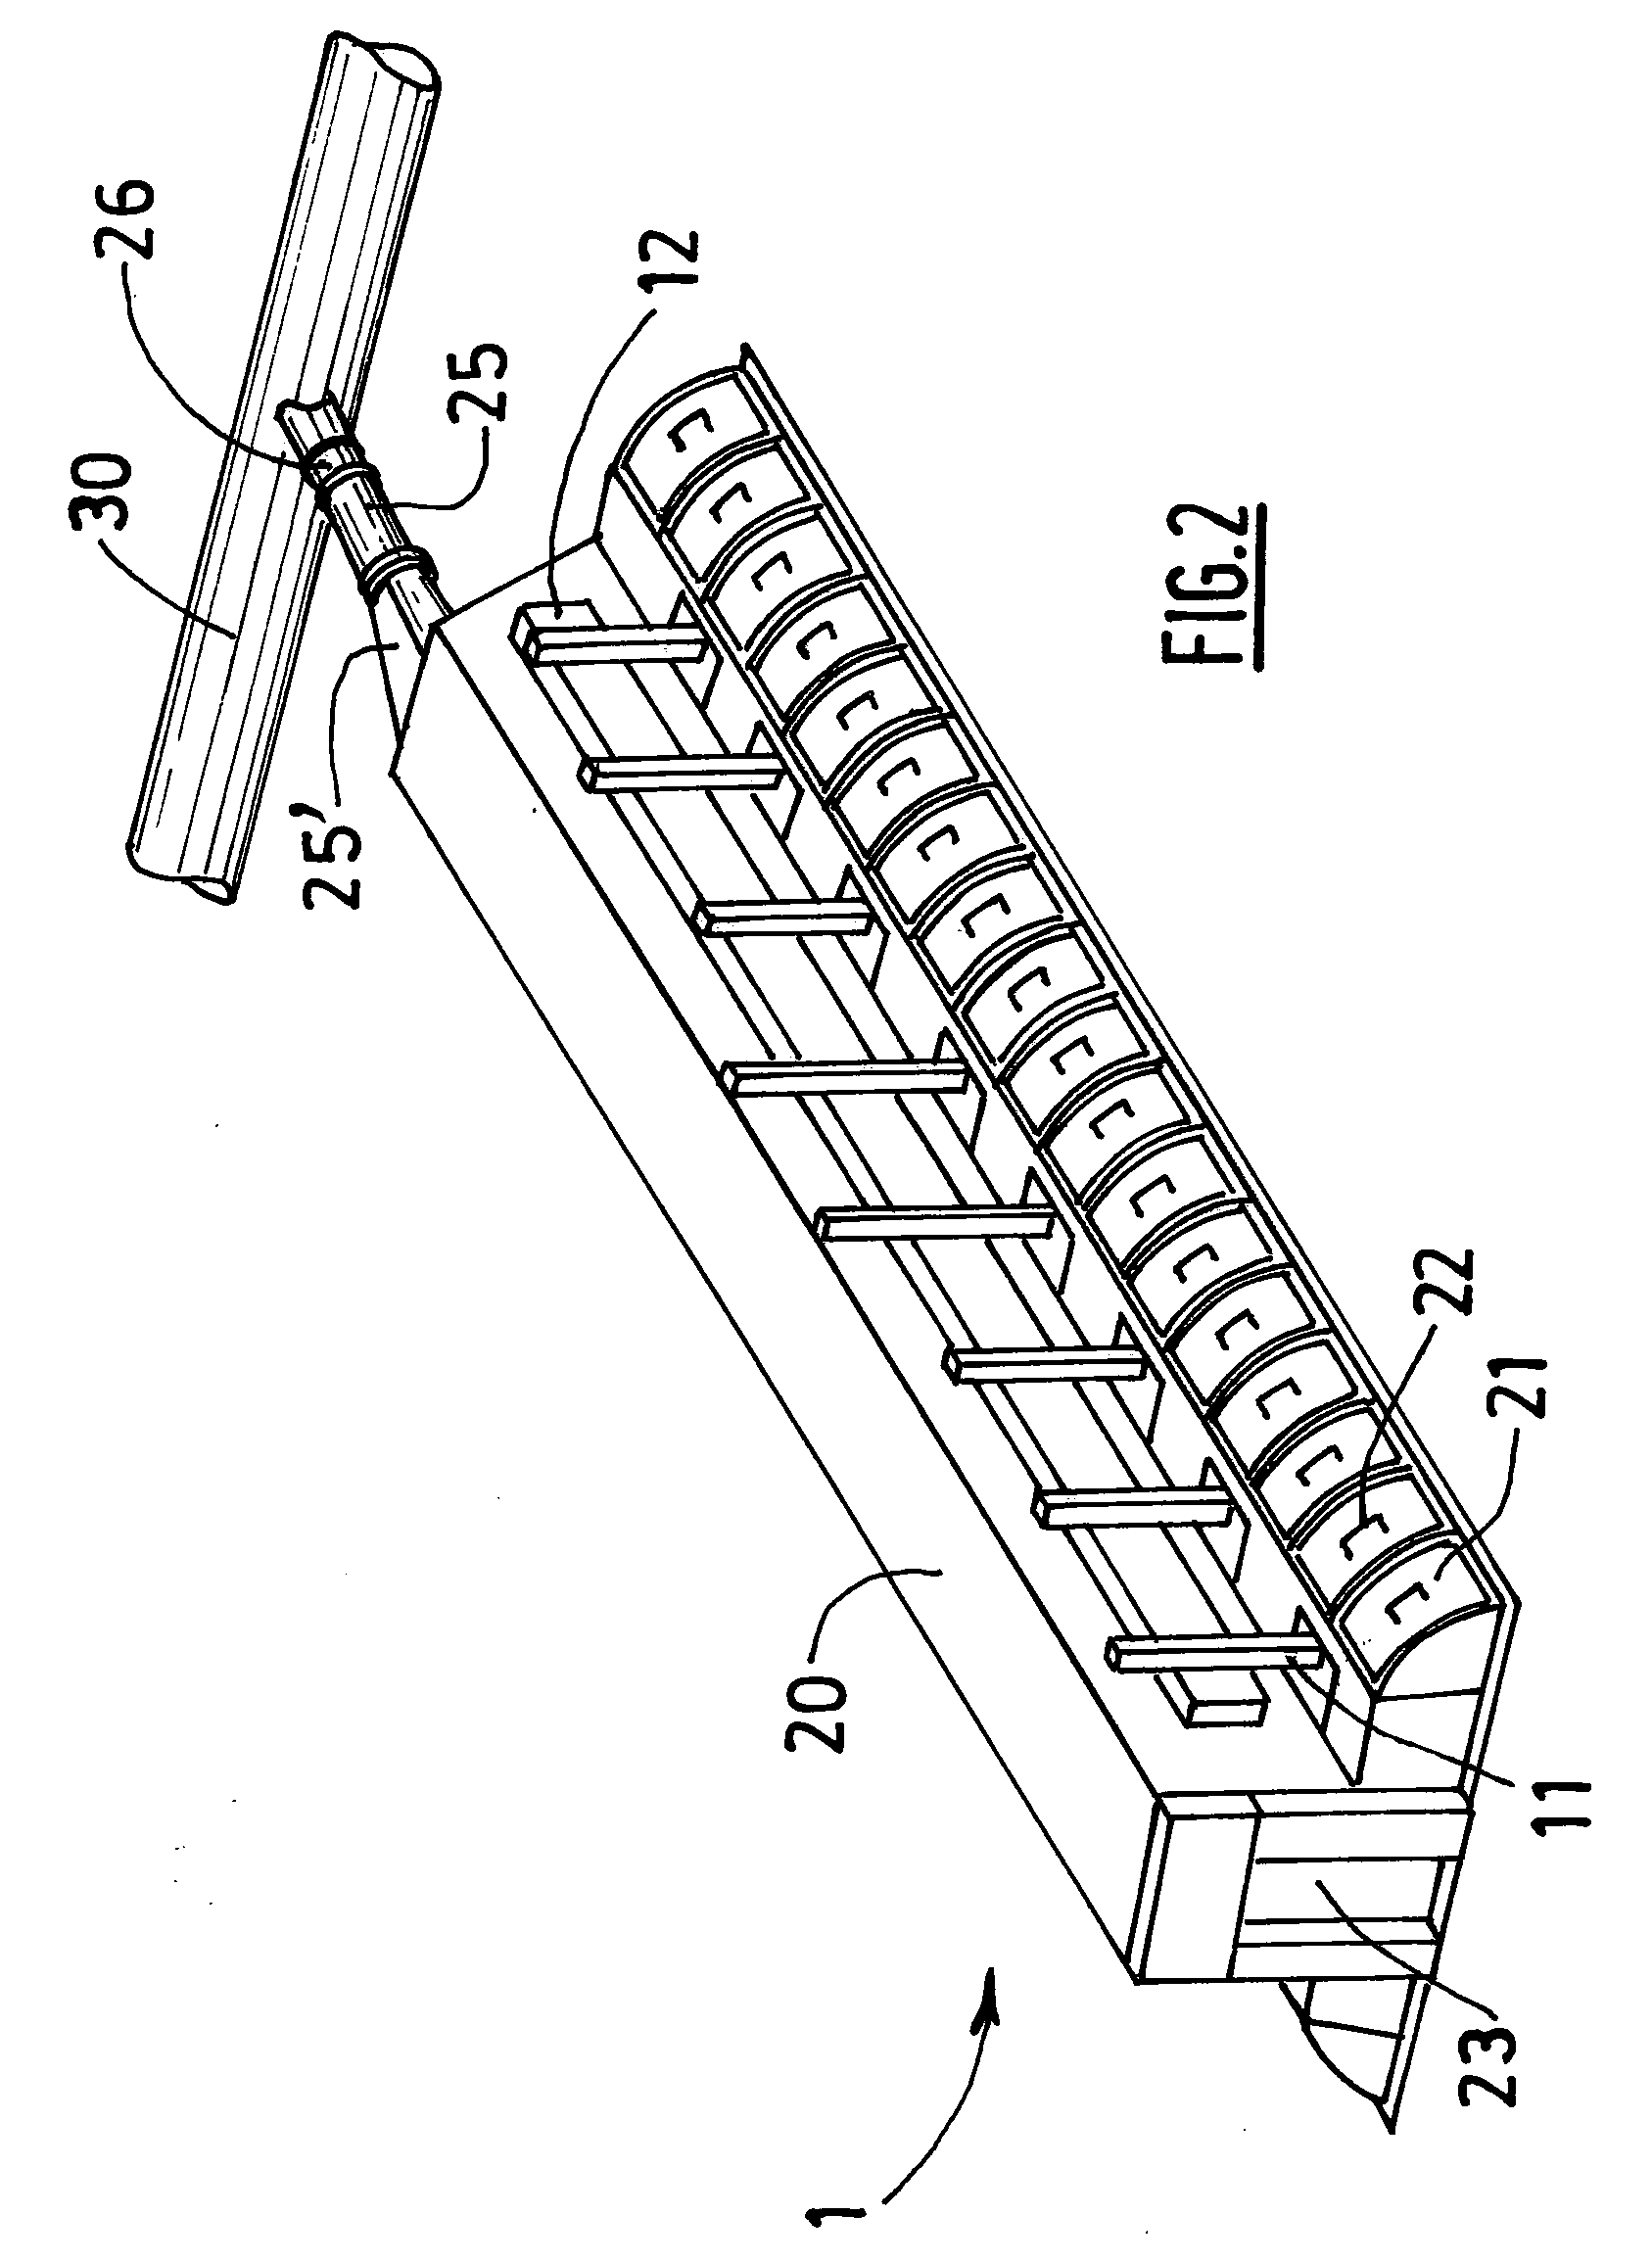 System and process for collecting effluents from an electrolytic cell